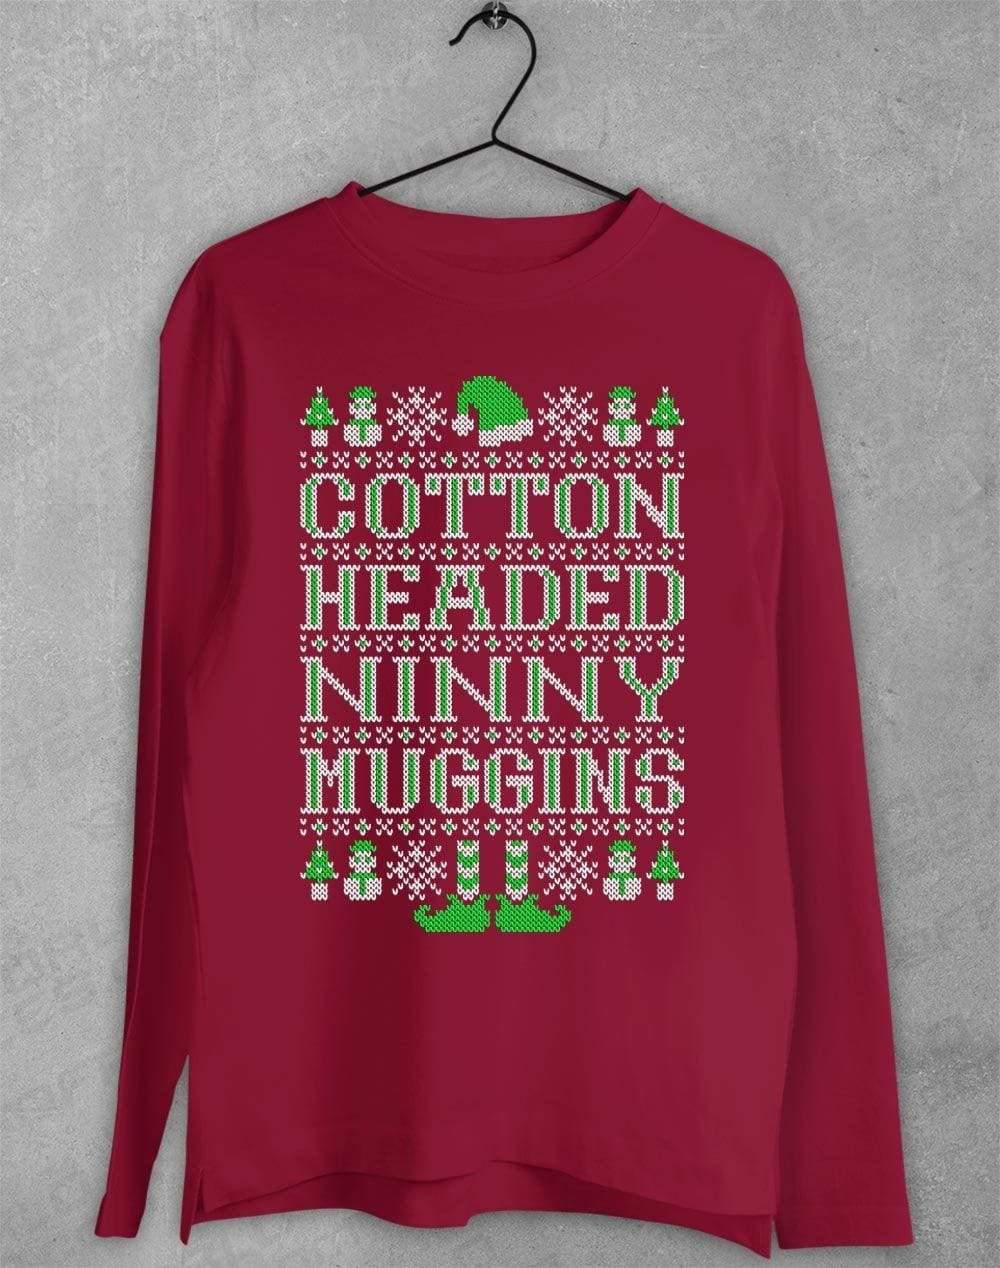 Cotton Headed Ninny Muggins Festive Knitted-Look Long Sleeve T-Shirt S / Cardinal Red  - Off World Tees